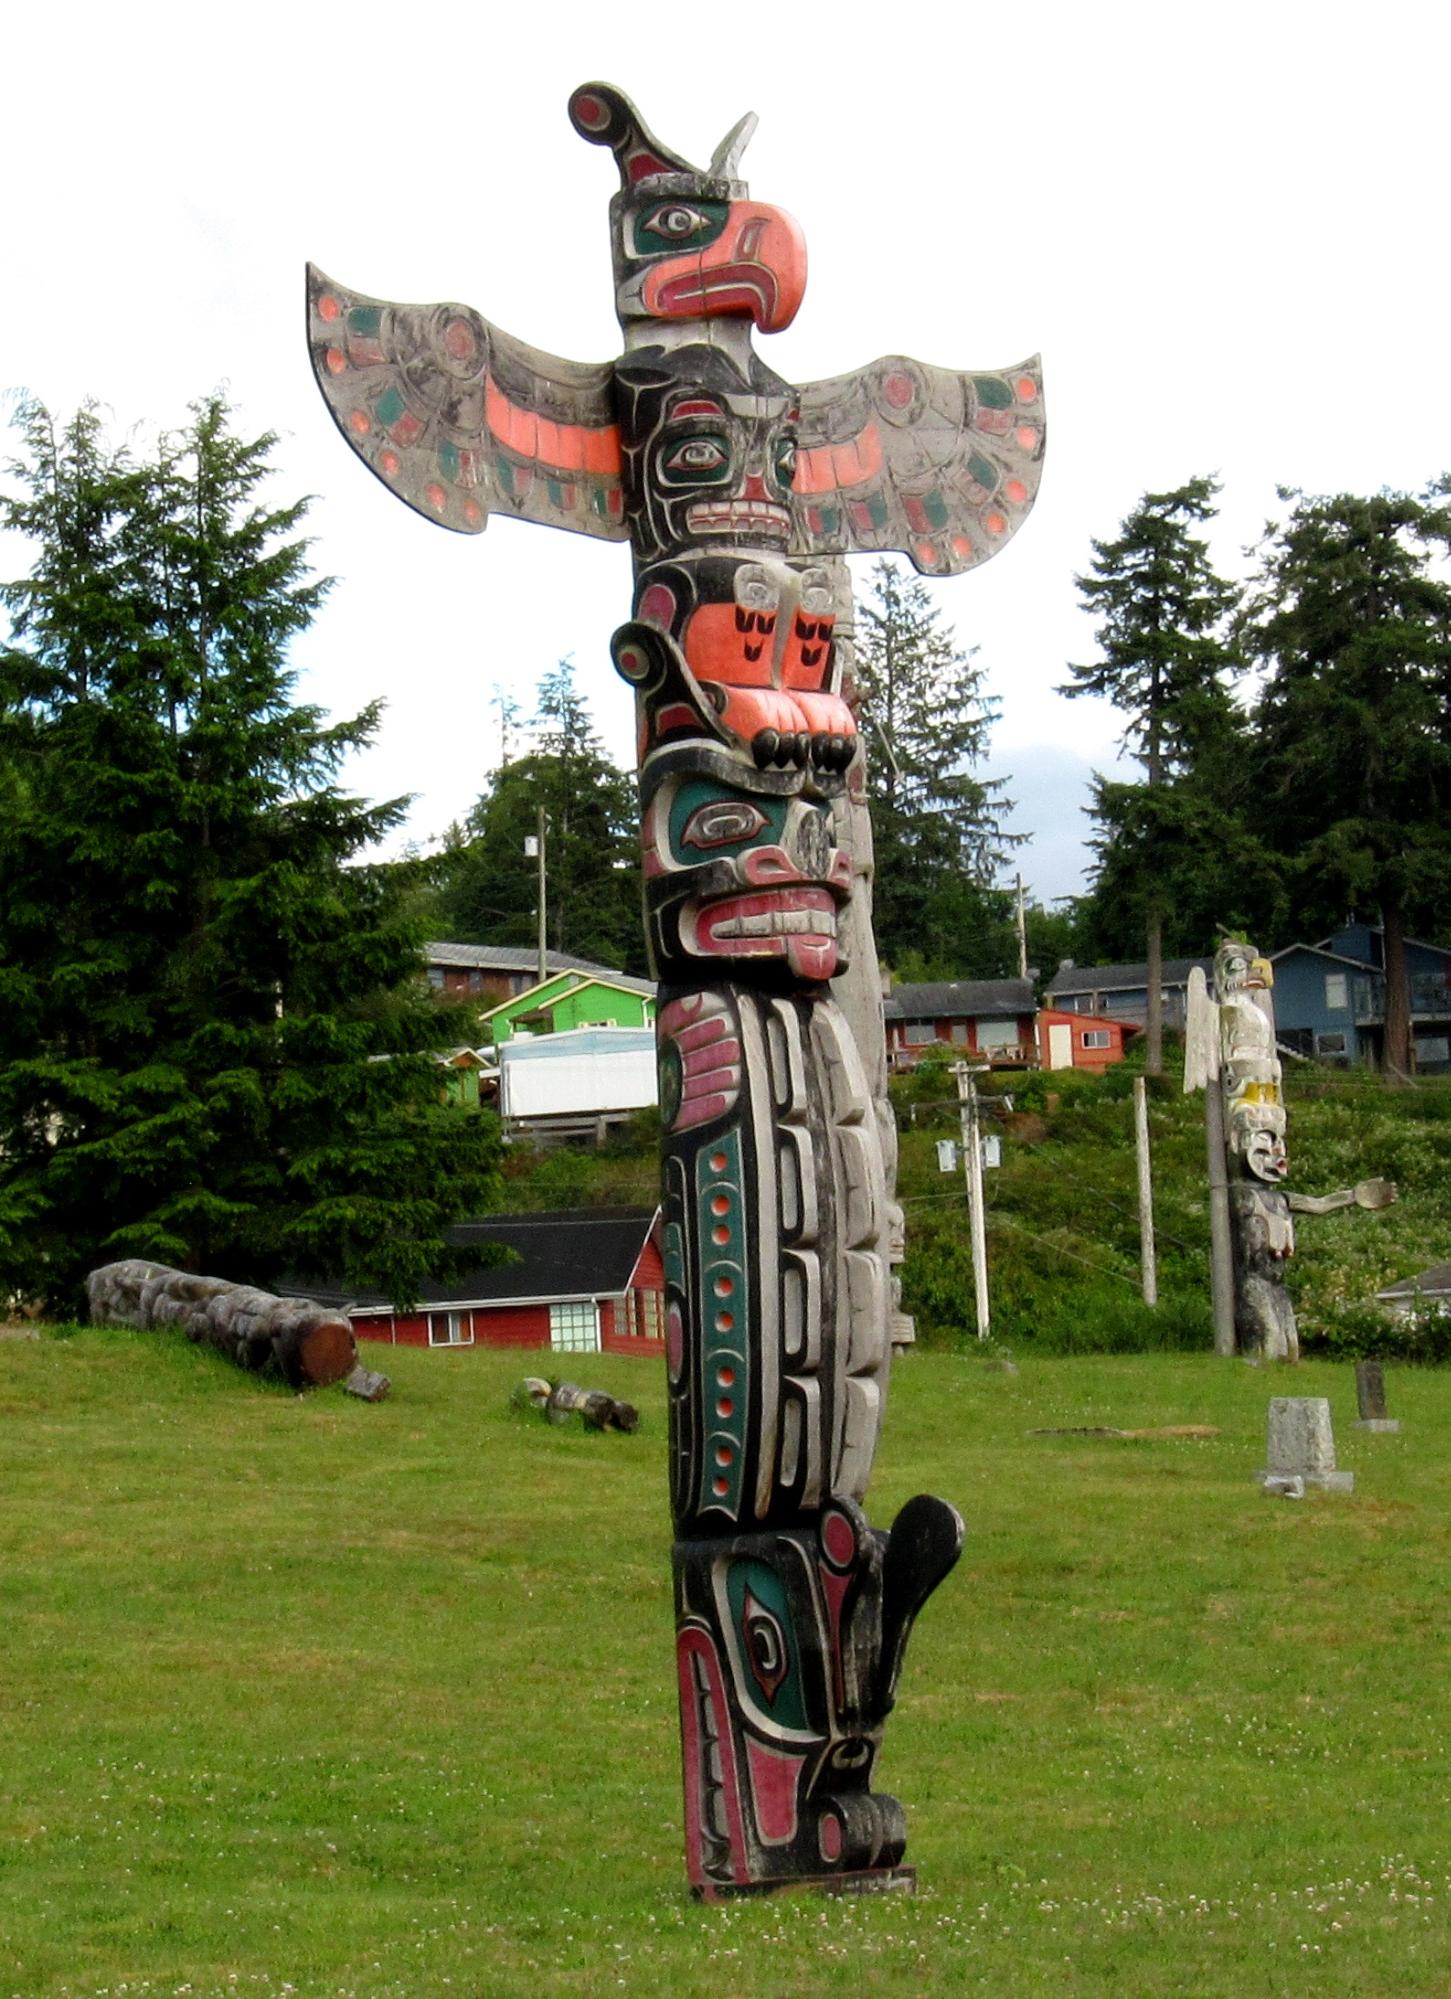 A colourful totem pole erected on a lush green lawn.